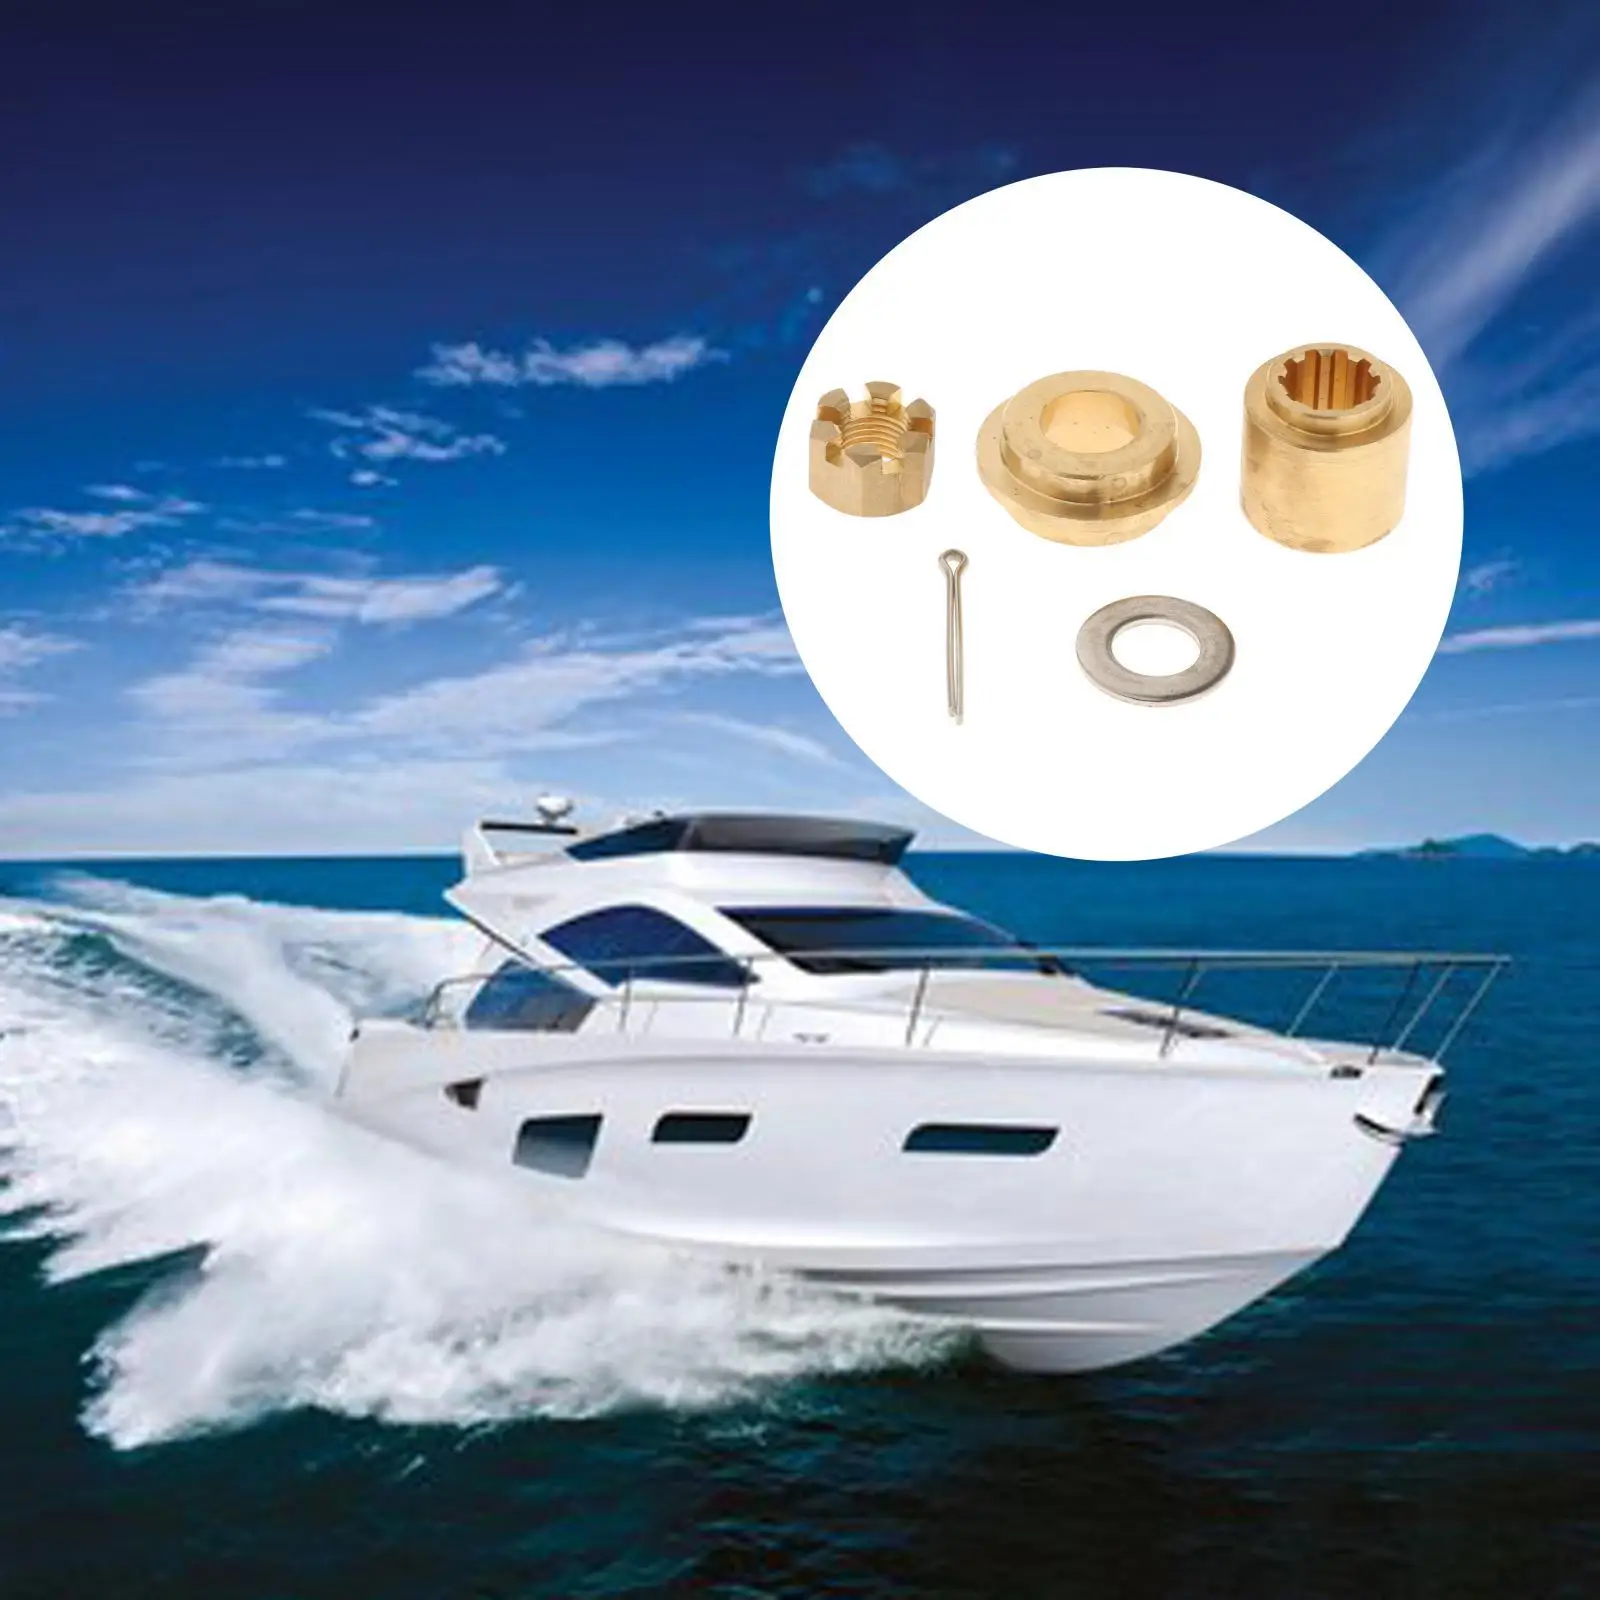 Prop Propeller Installation Nut Kit for  Outboard, 20, 25, 30HP 6L2-45987-01 92990-14200 91490-30020